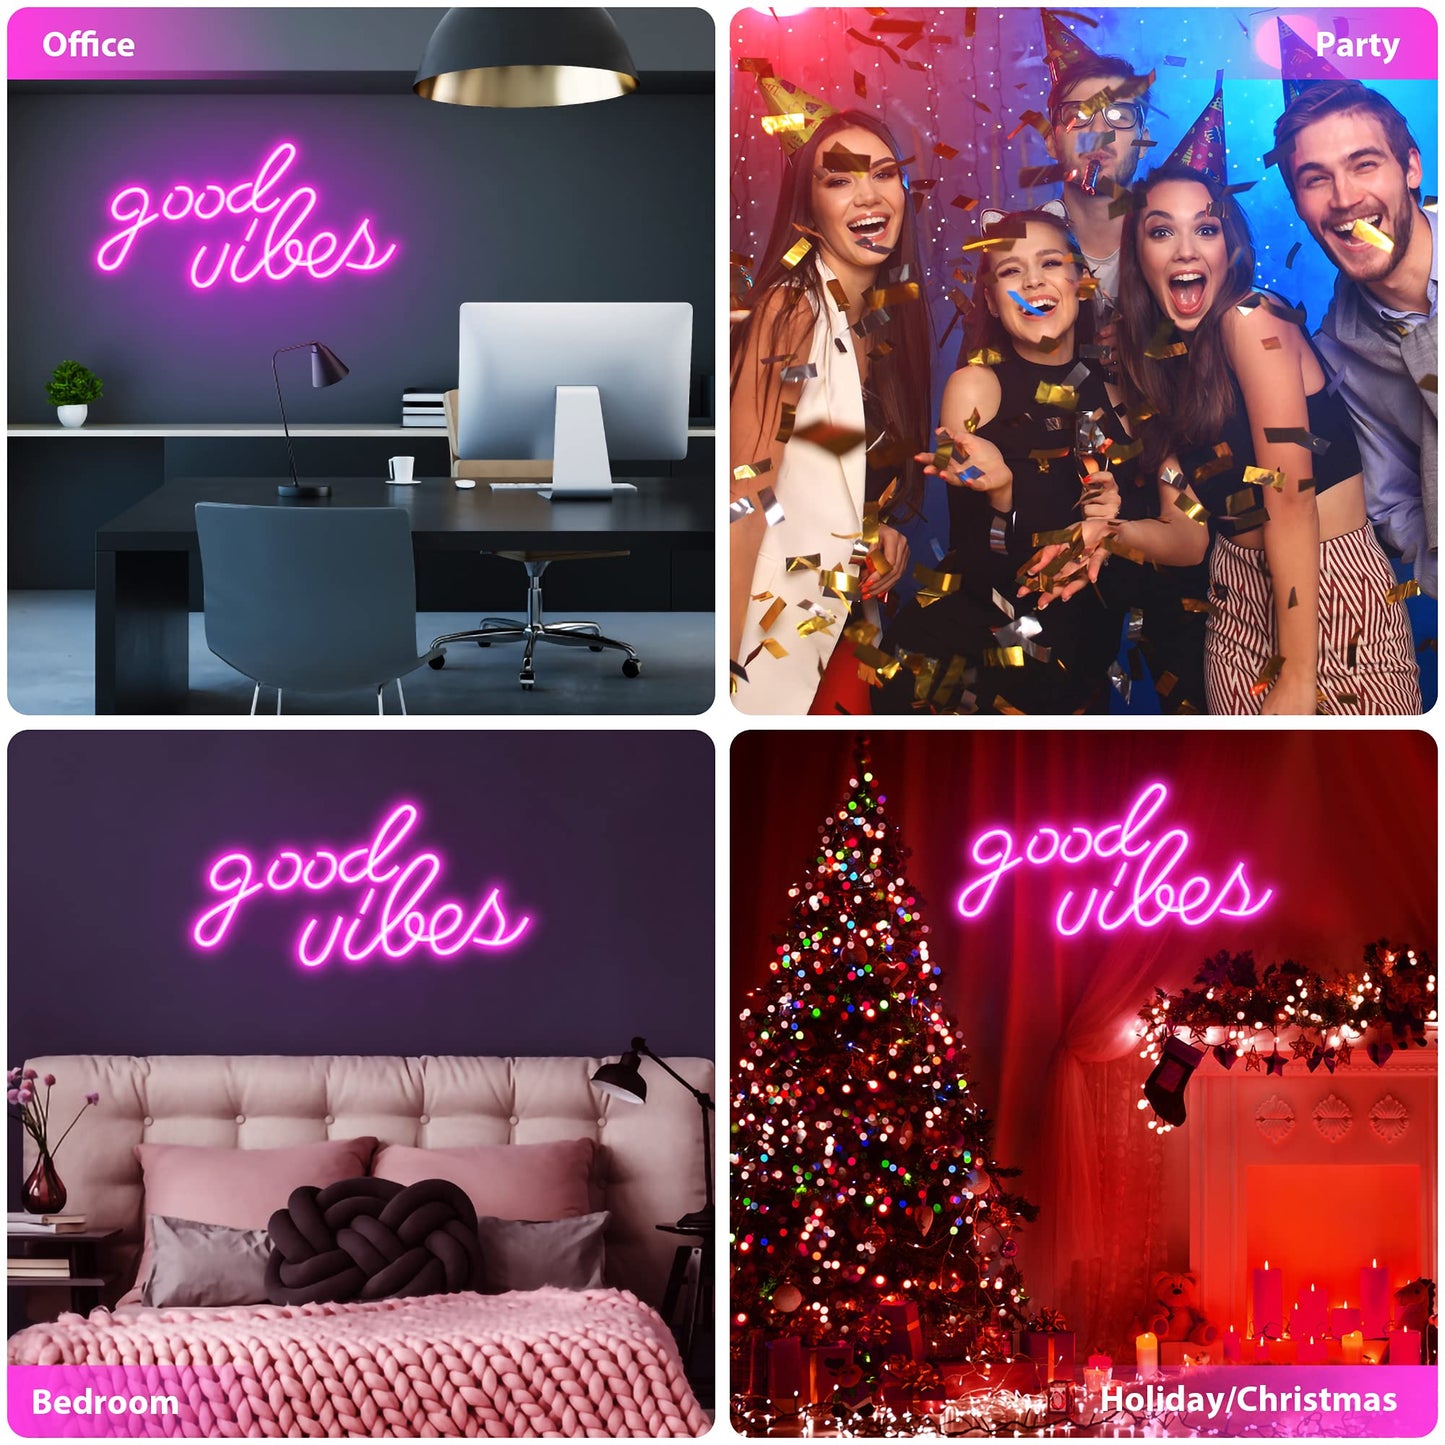 Good Vibes Neon Sign for Wall Decor (16.1 x 8.3 inch)